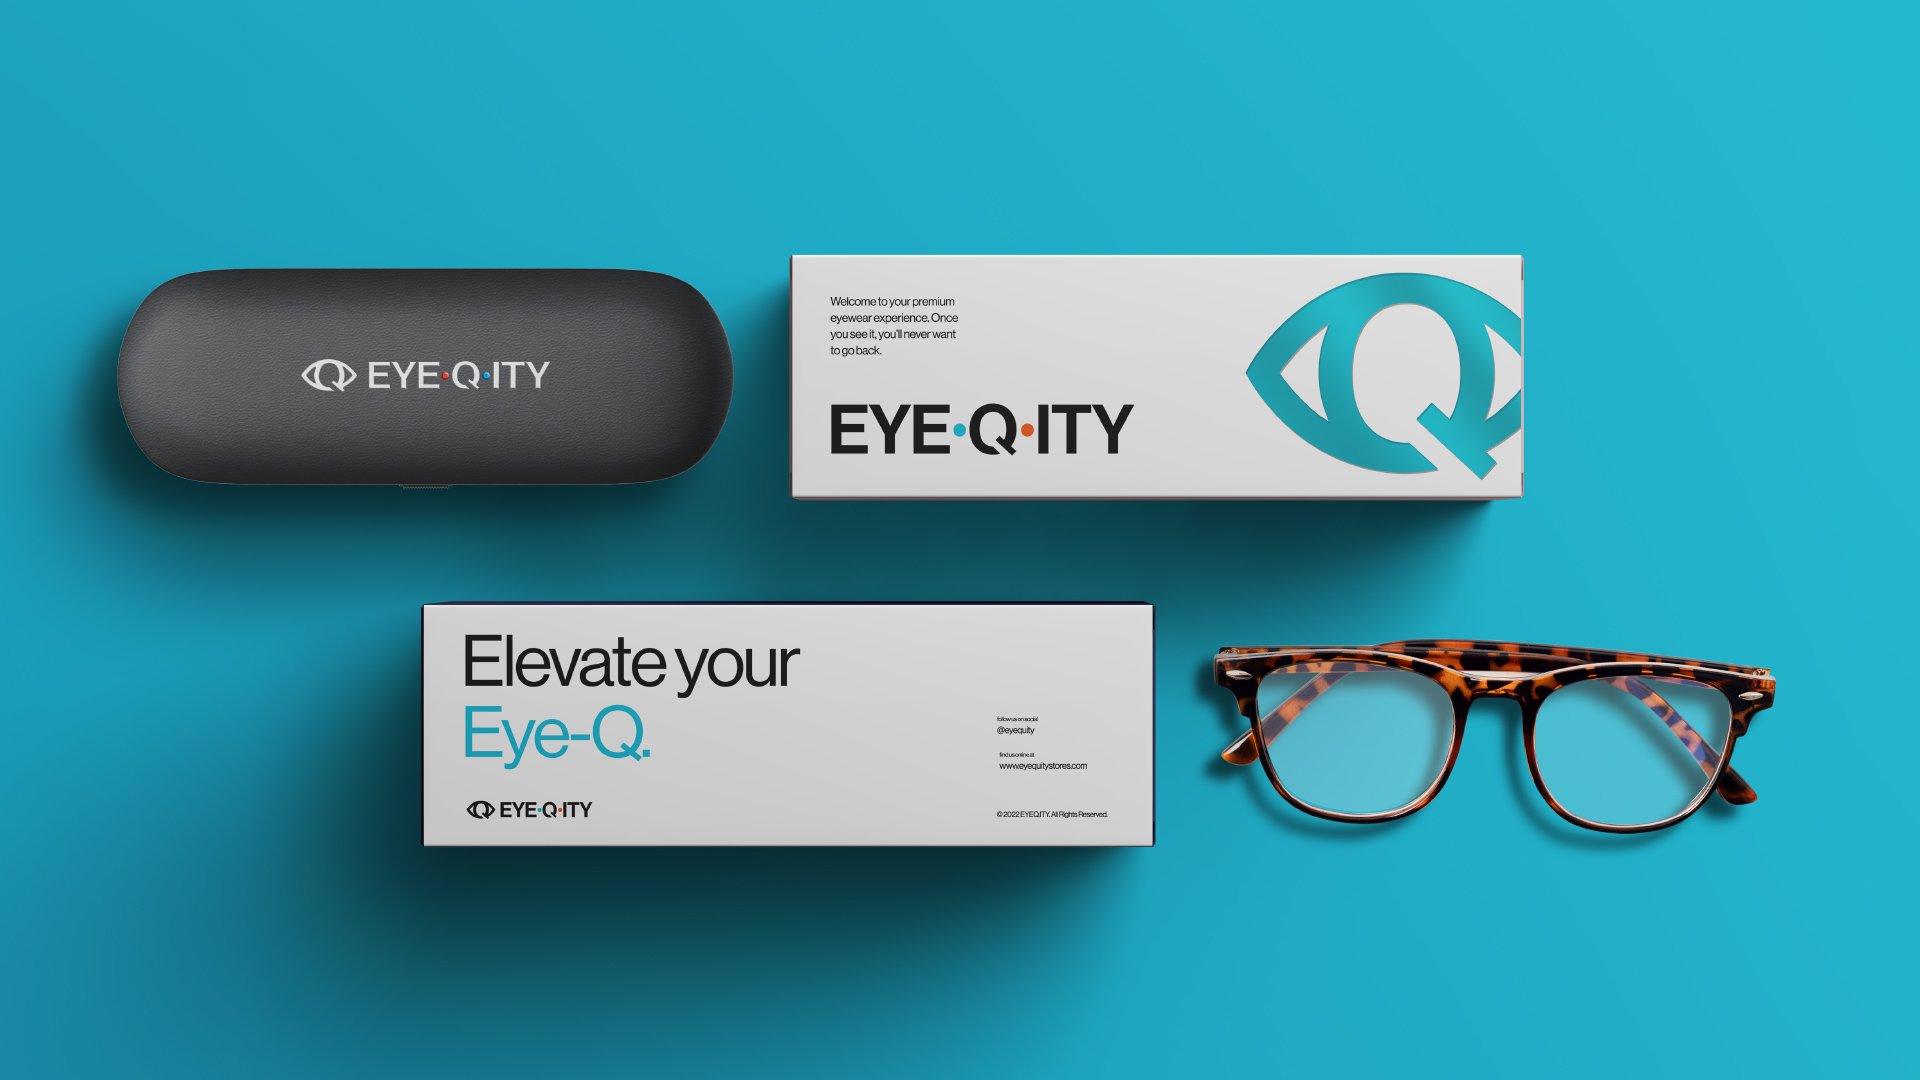 A glasses case sits next to a glasses box that says, “Welcome to your premium eyewear experience. Once you see it, you’ll never want to go back.” Below that are a pair of glasses and the other side of the box with the logo.